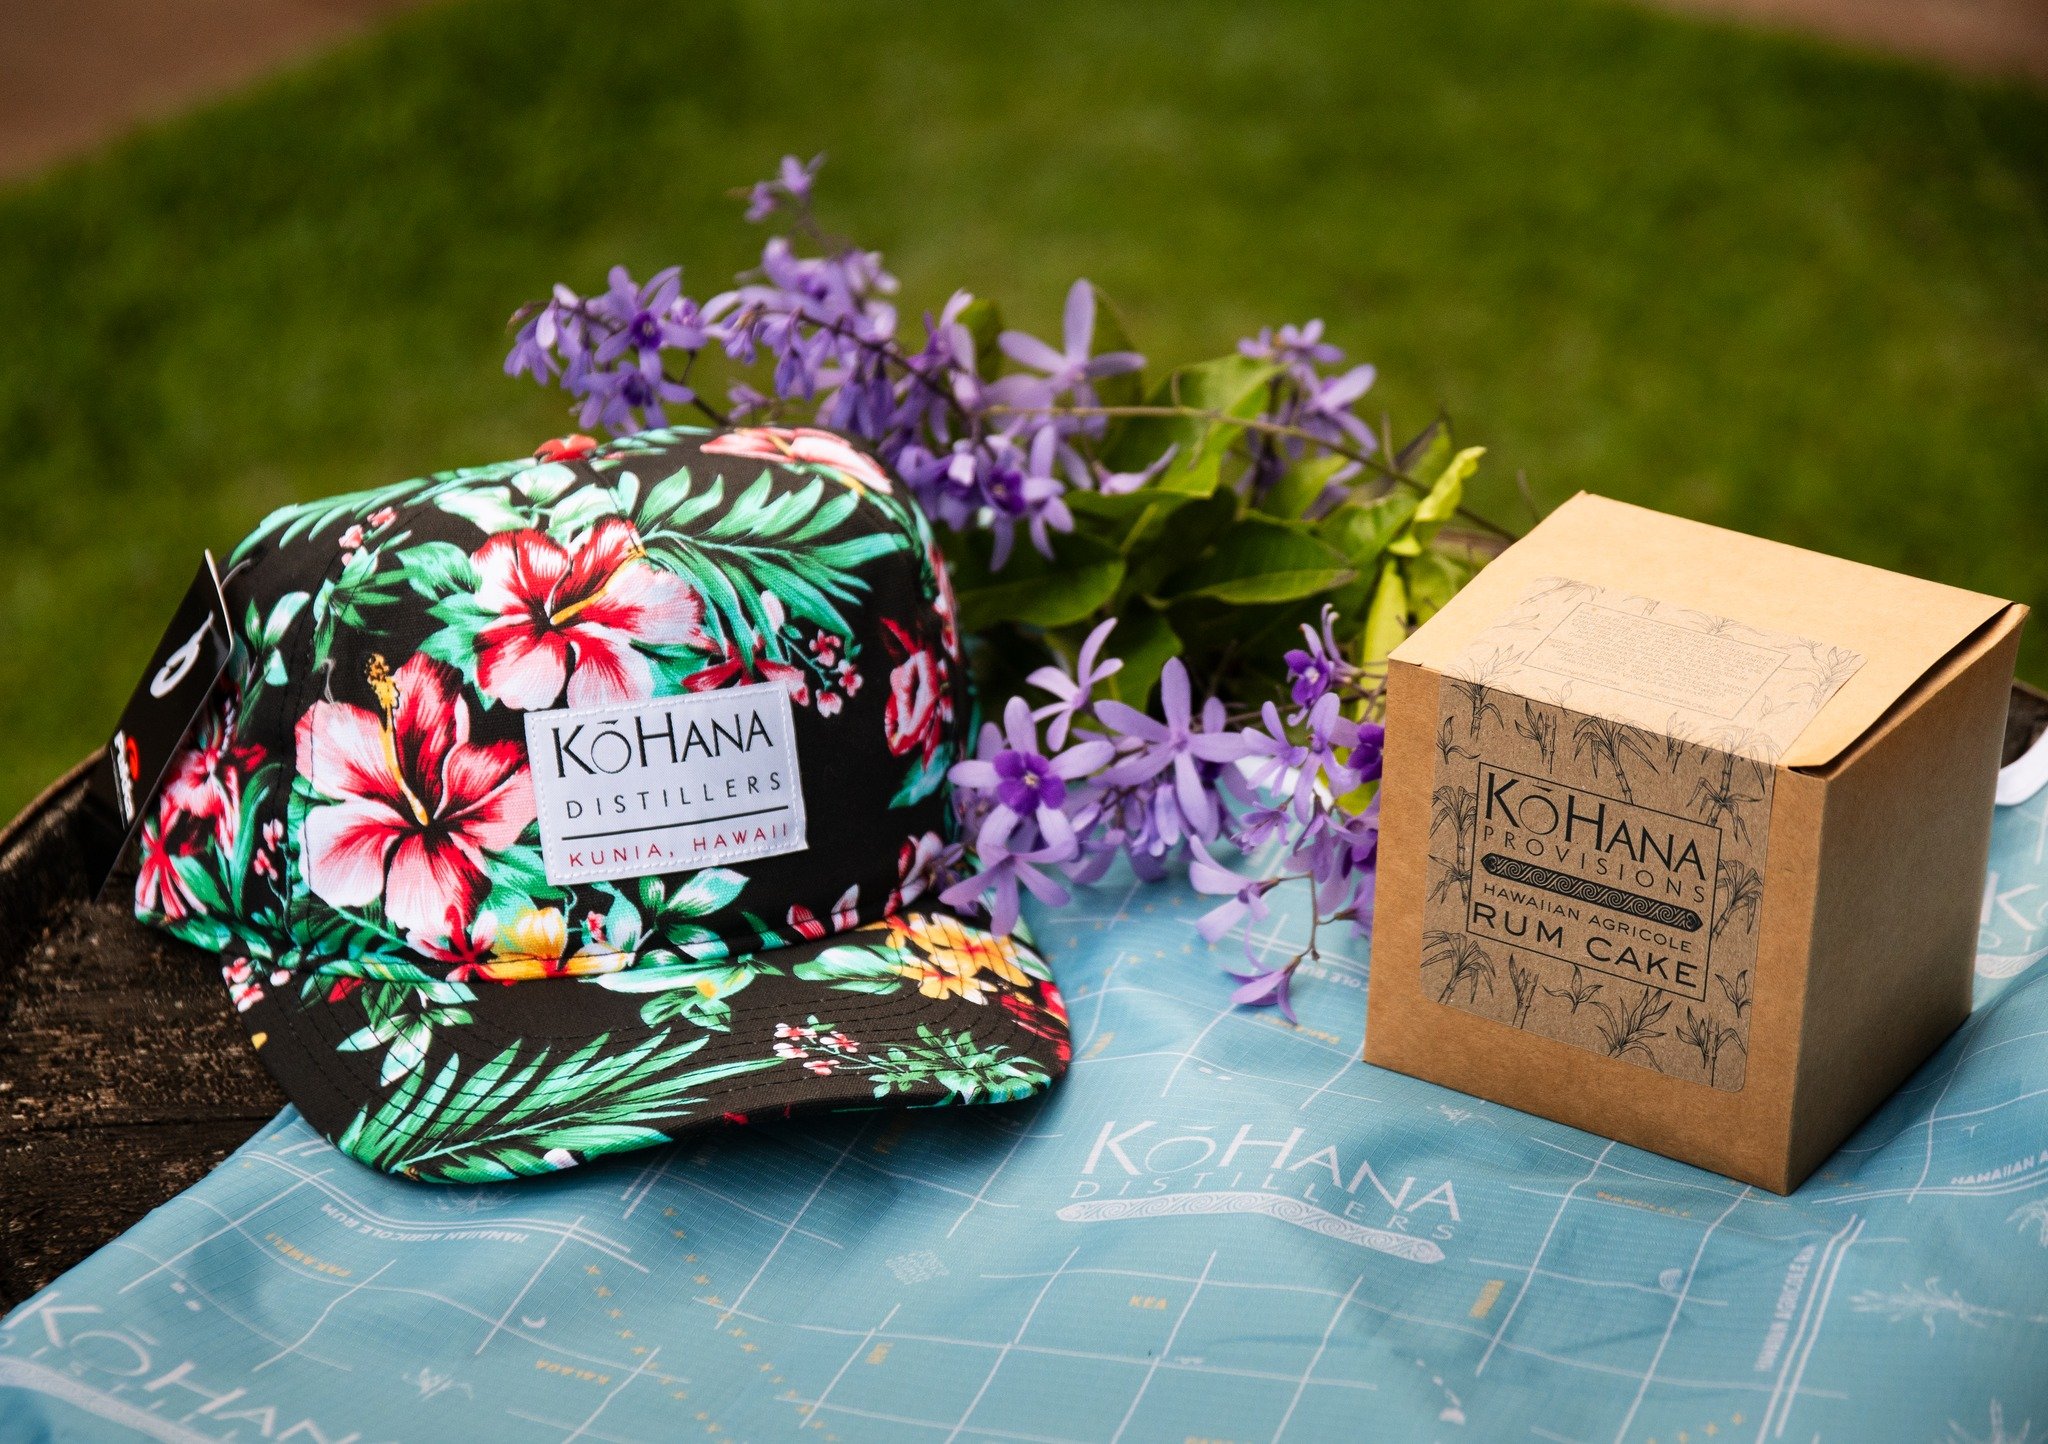 **Kō Hana Mother&rsquo;s Day Giveaway*** 🌟 
We're celebrating all of the incredible moms out there with a special GIVEAWAY! Win one stylish women's hat, one blue carry bag, and one onolicious Kō Hana Rum cake &ndash; the perfect gifts to spoil yours